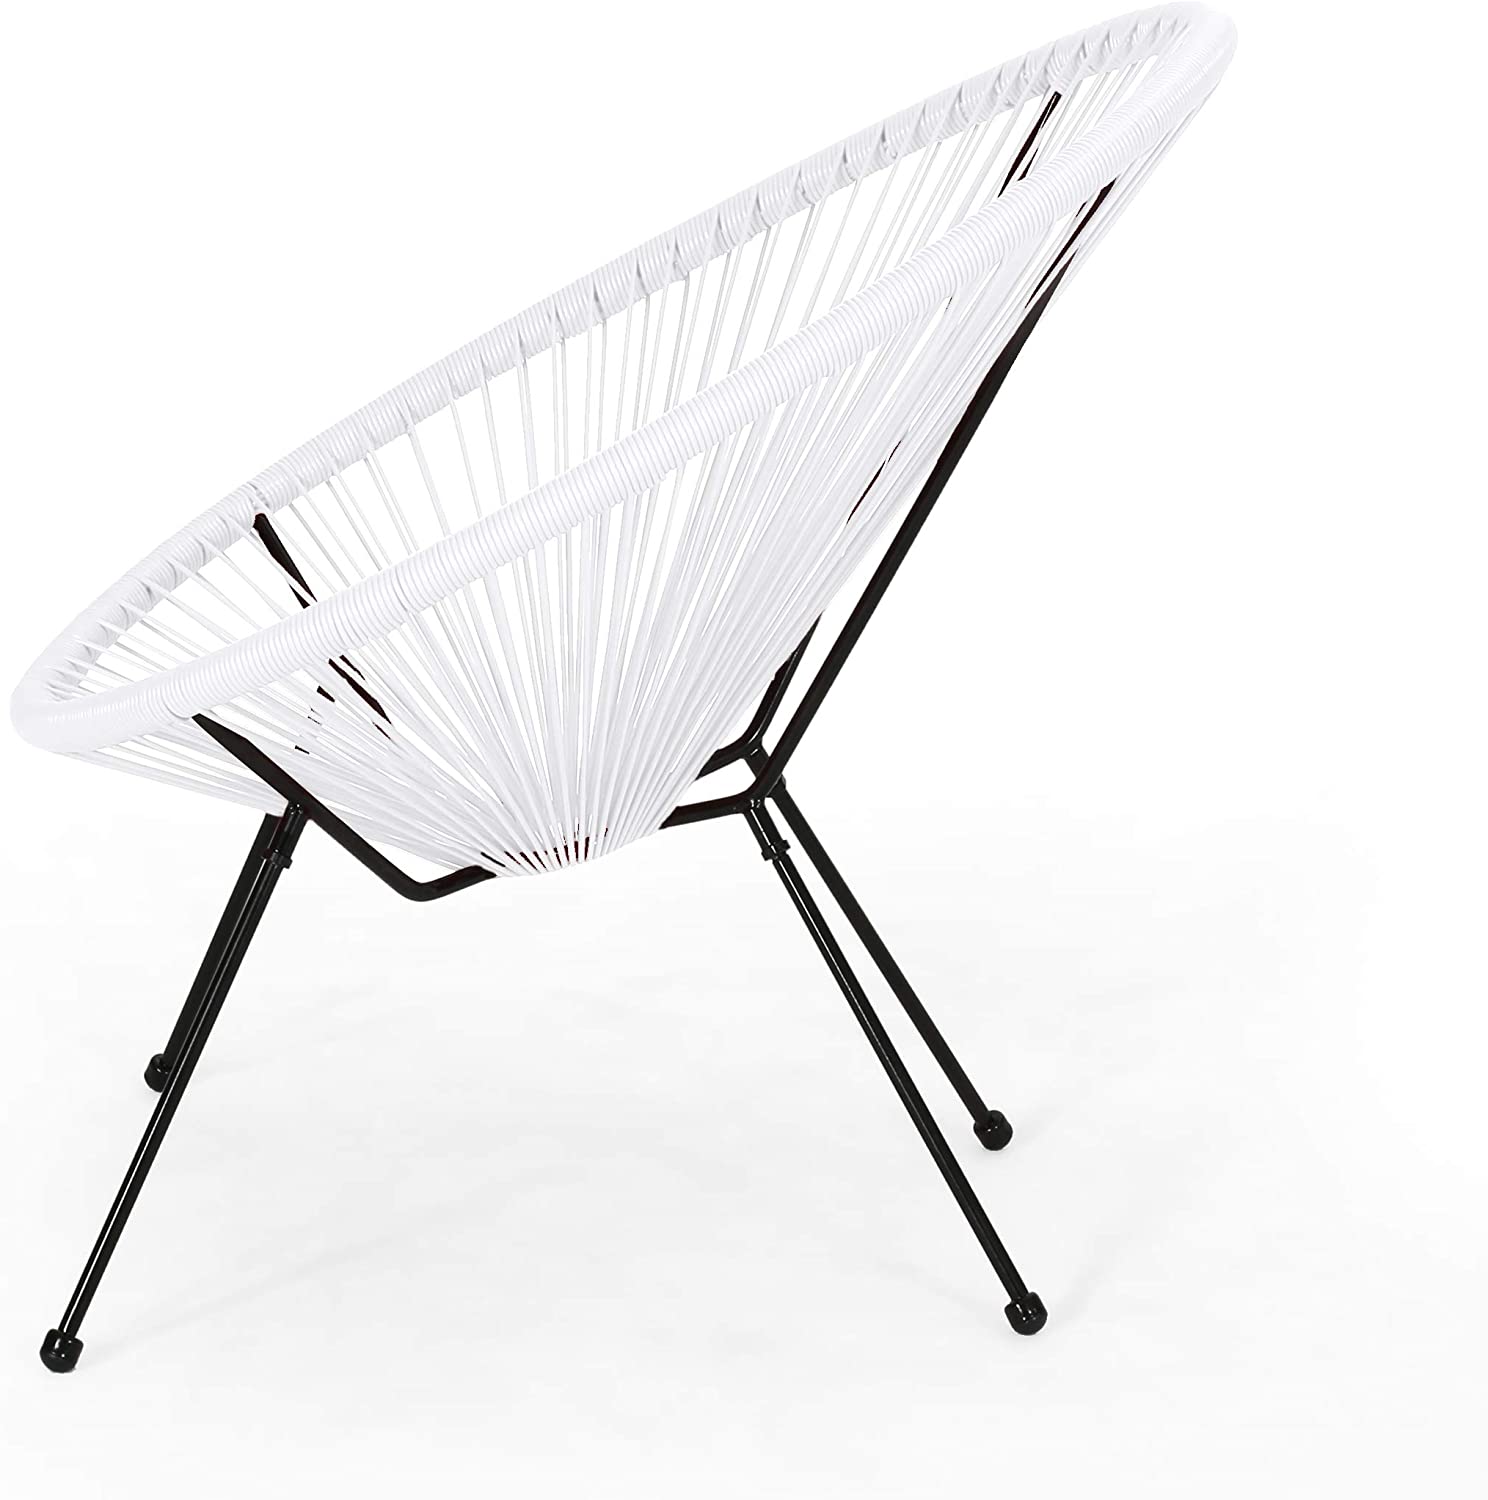 Kevinplus Outdoor Hammock Weave Chair with Steel Frame, Patio Chair Set of 2 Weave Lounge Chair Sun Oval Chair Indoor Outdoor Chairs - image 3 of 7